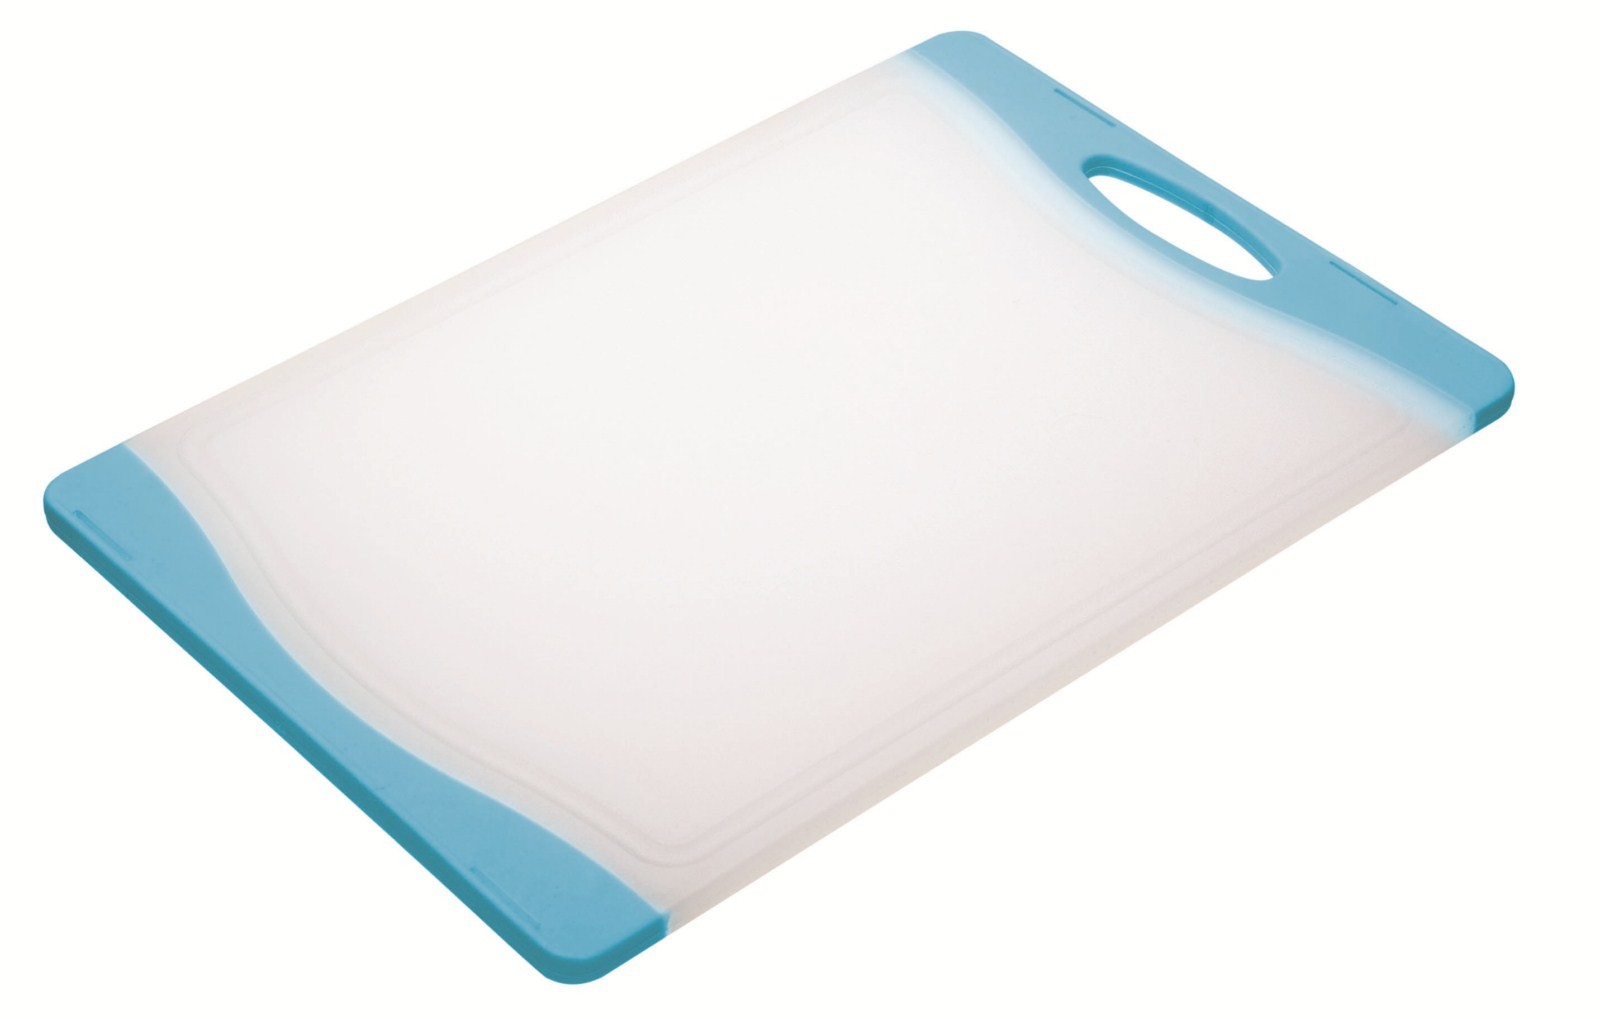 Buy Colourworks Blue Reversible Chopping Board online at smithsofloughton.com